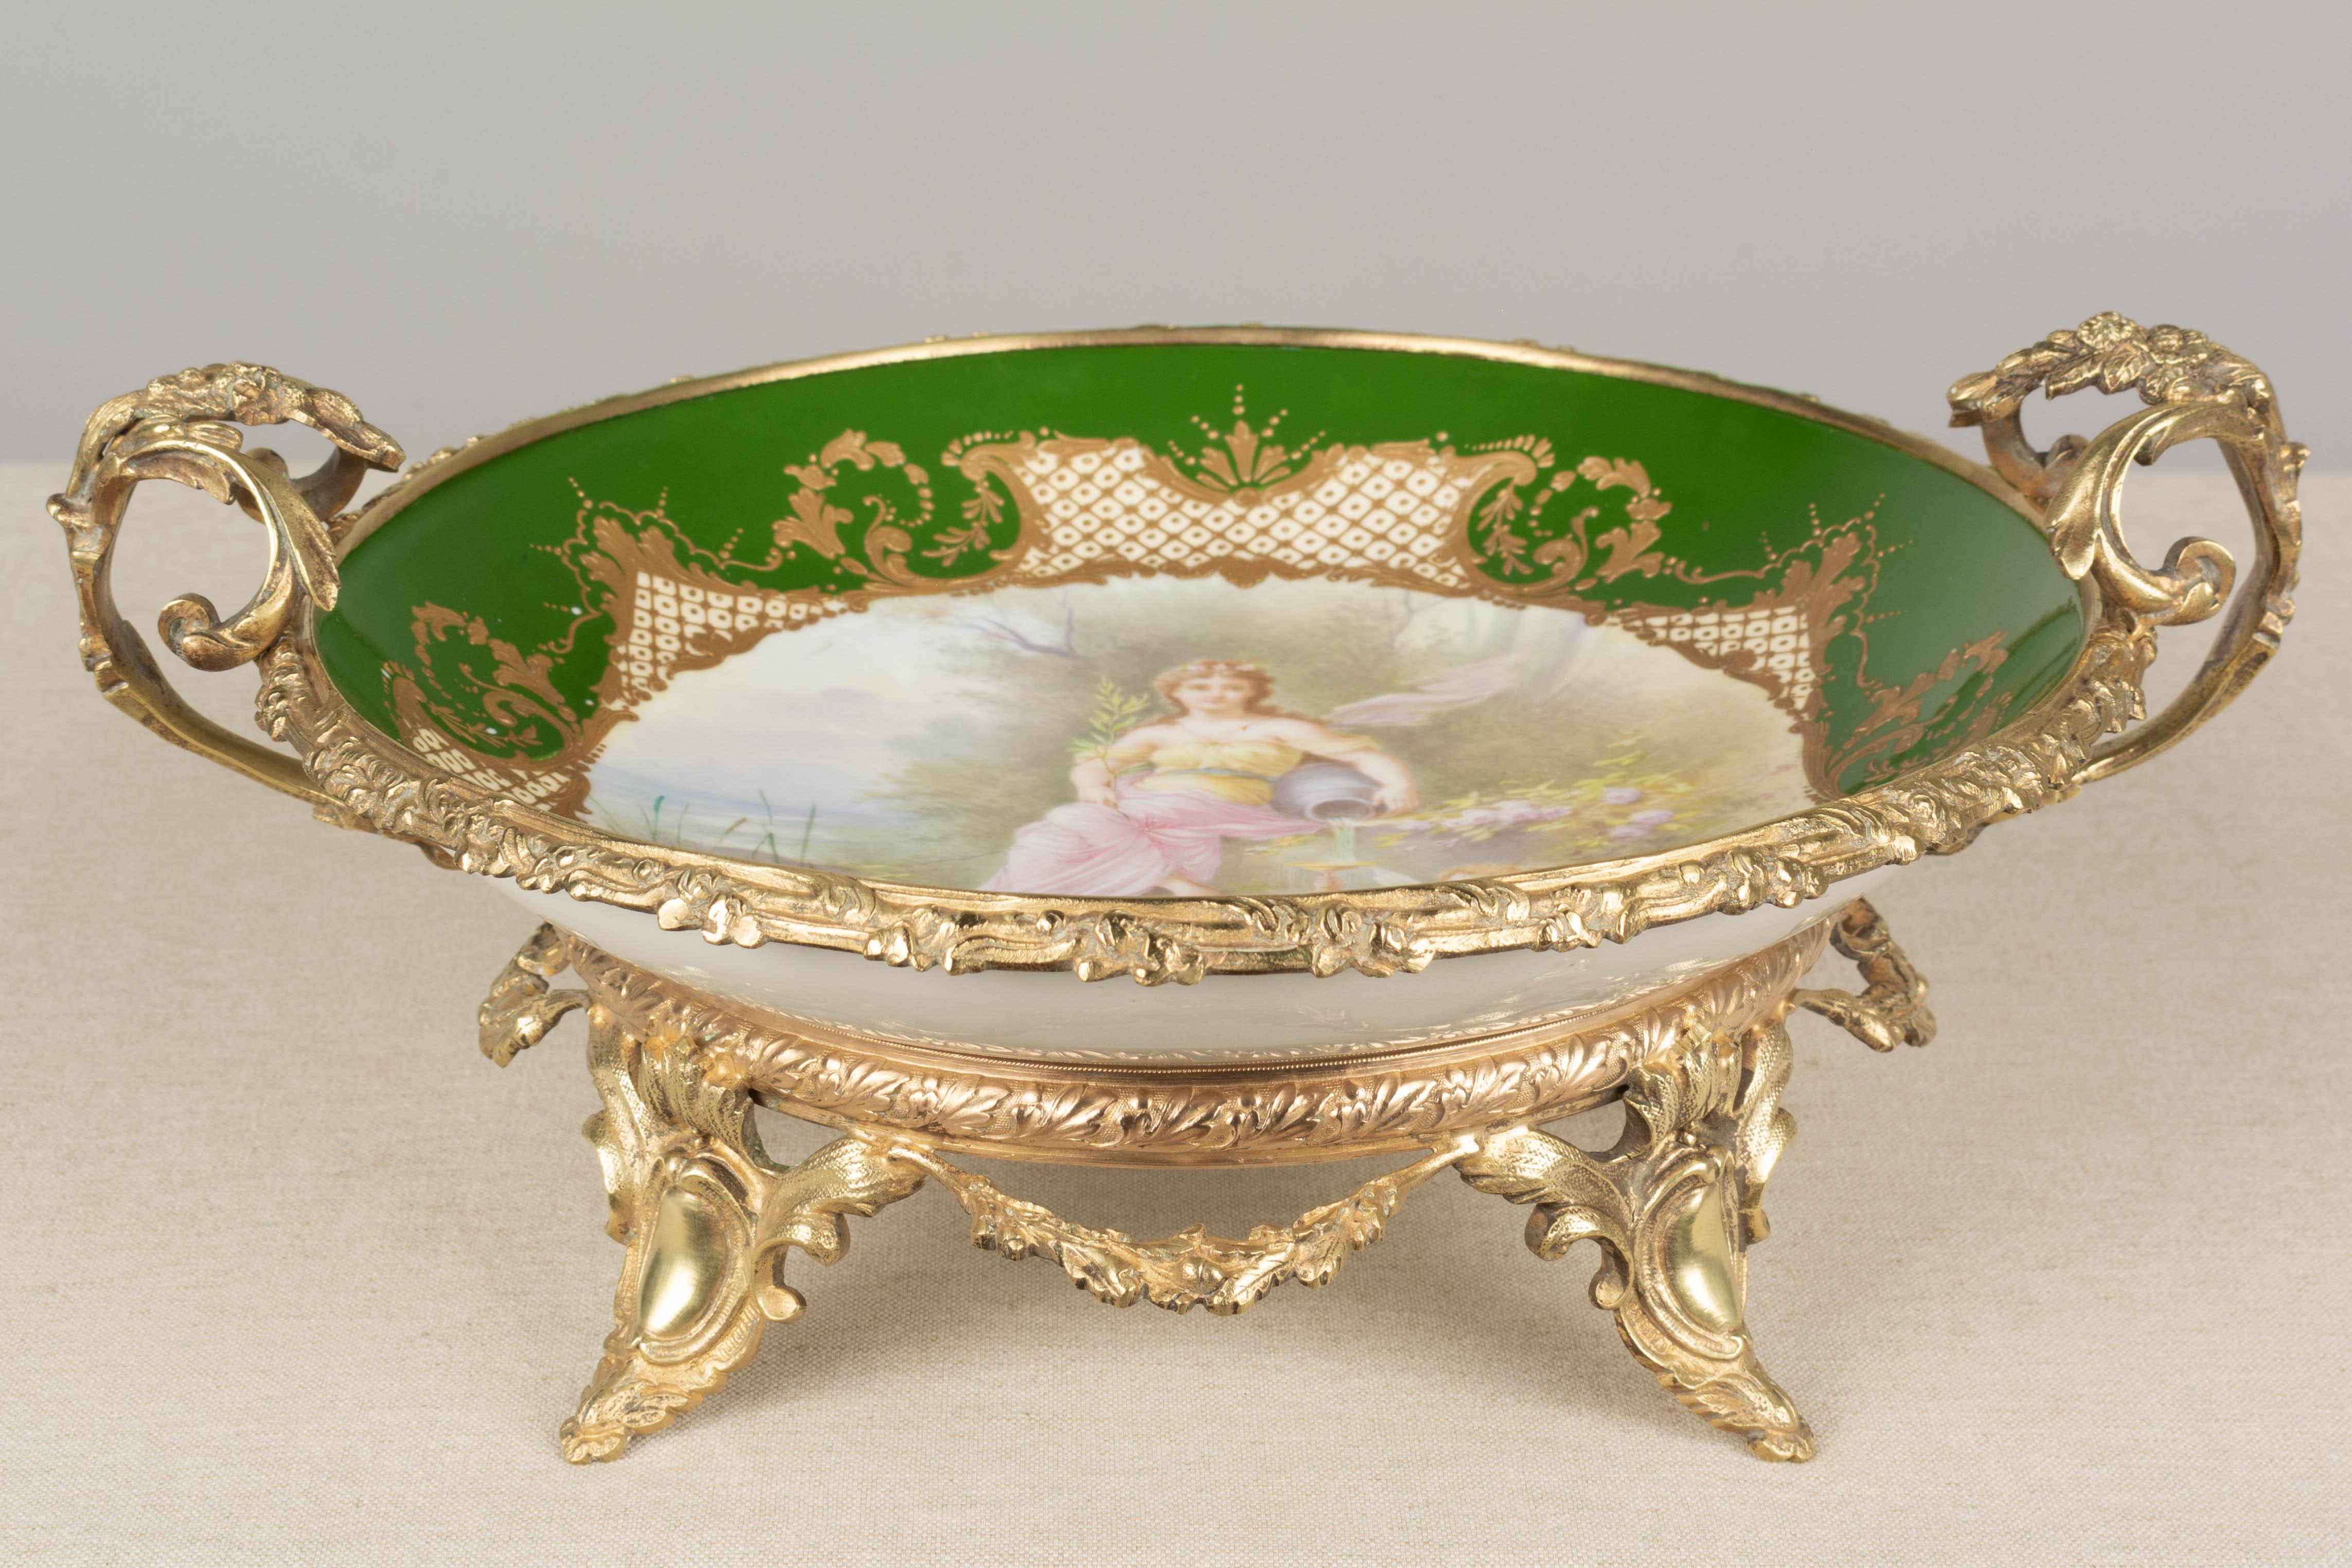 A fine 19th Century French cast ormolu bronze mounted Sèvres porcelain centerpiece with double handles and raised on a footed base. Inset Neo-classical style hand-painted porcelain shallow bowl signed A. Collot with realist Rococo composition of a